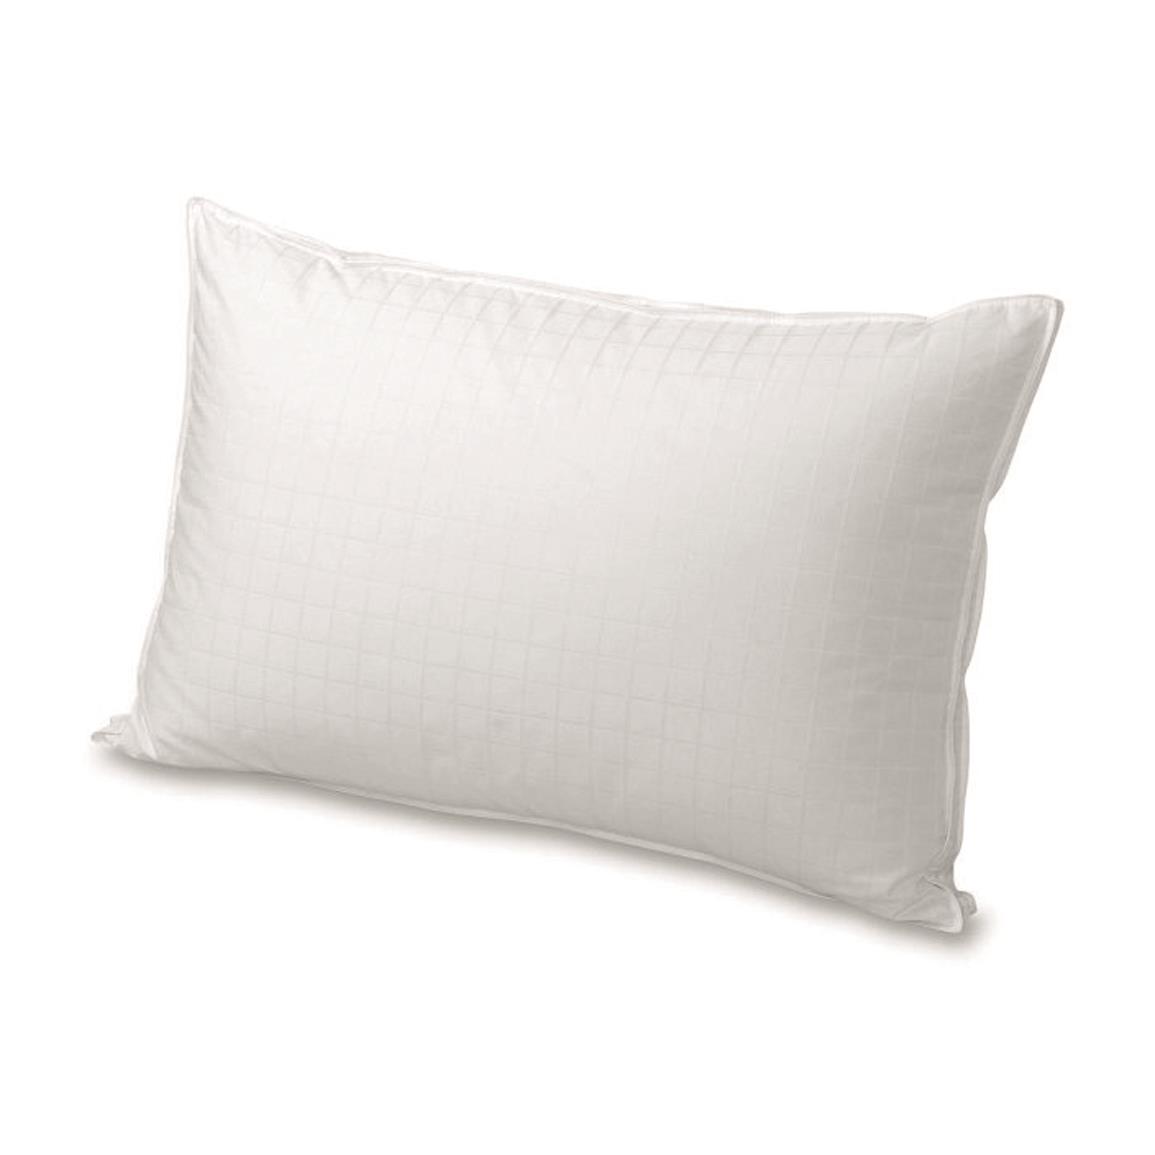 U.S. Military Surplus Polyester Fiber Pillows, 2 Pack, New